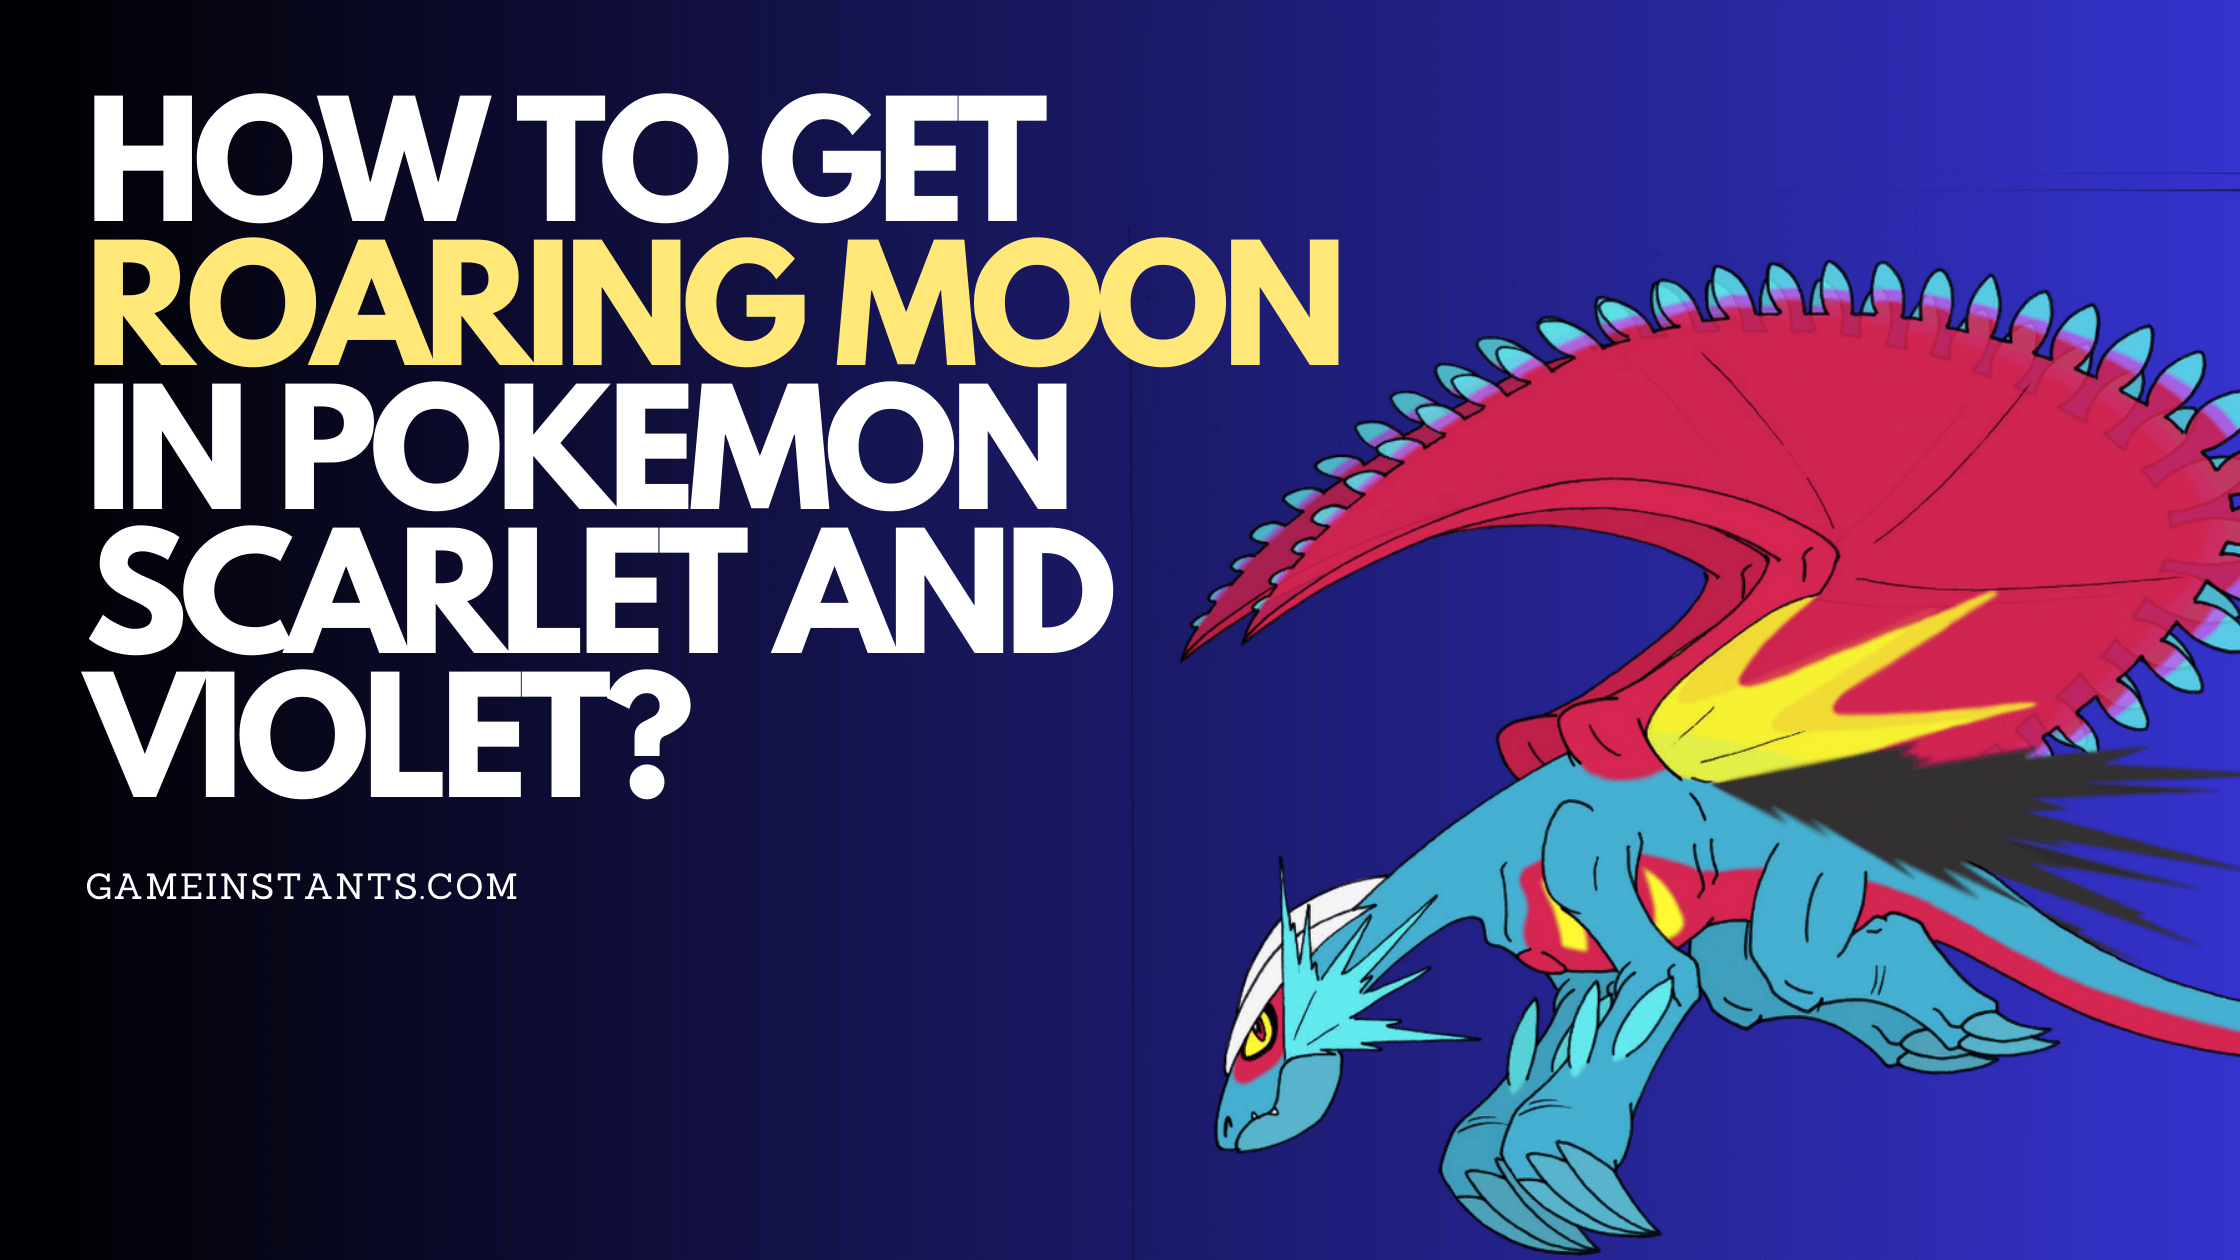 How To Get Roaring Moon in Pokemon Scarlet and Violet?